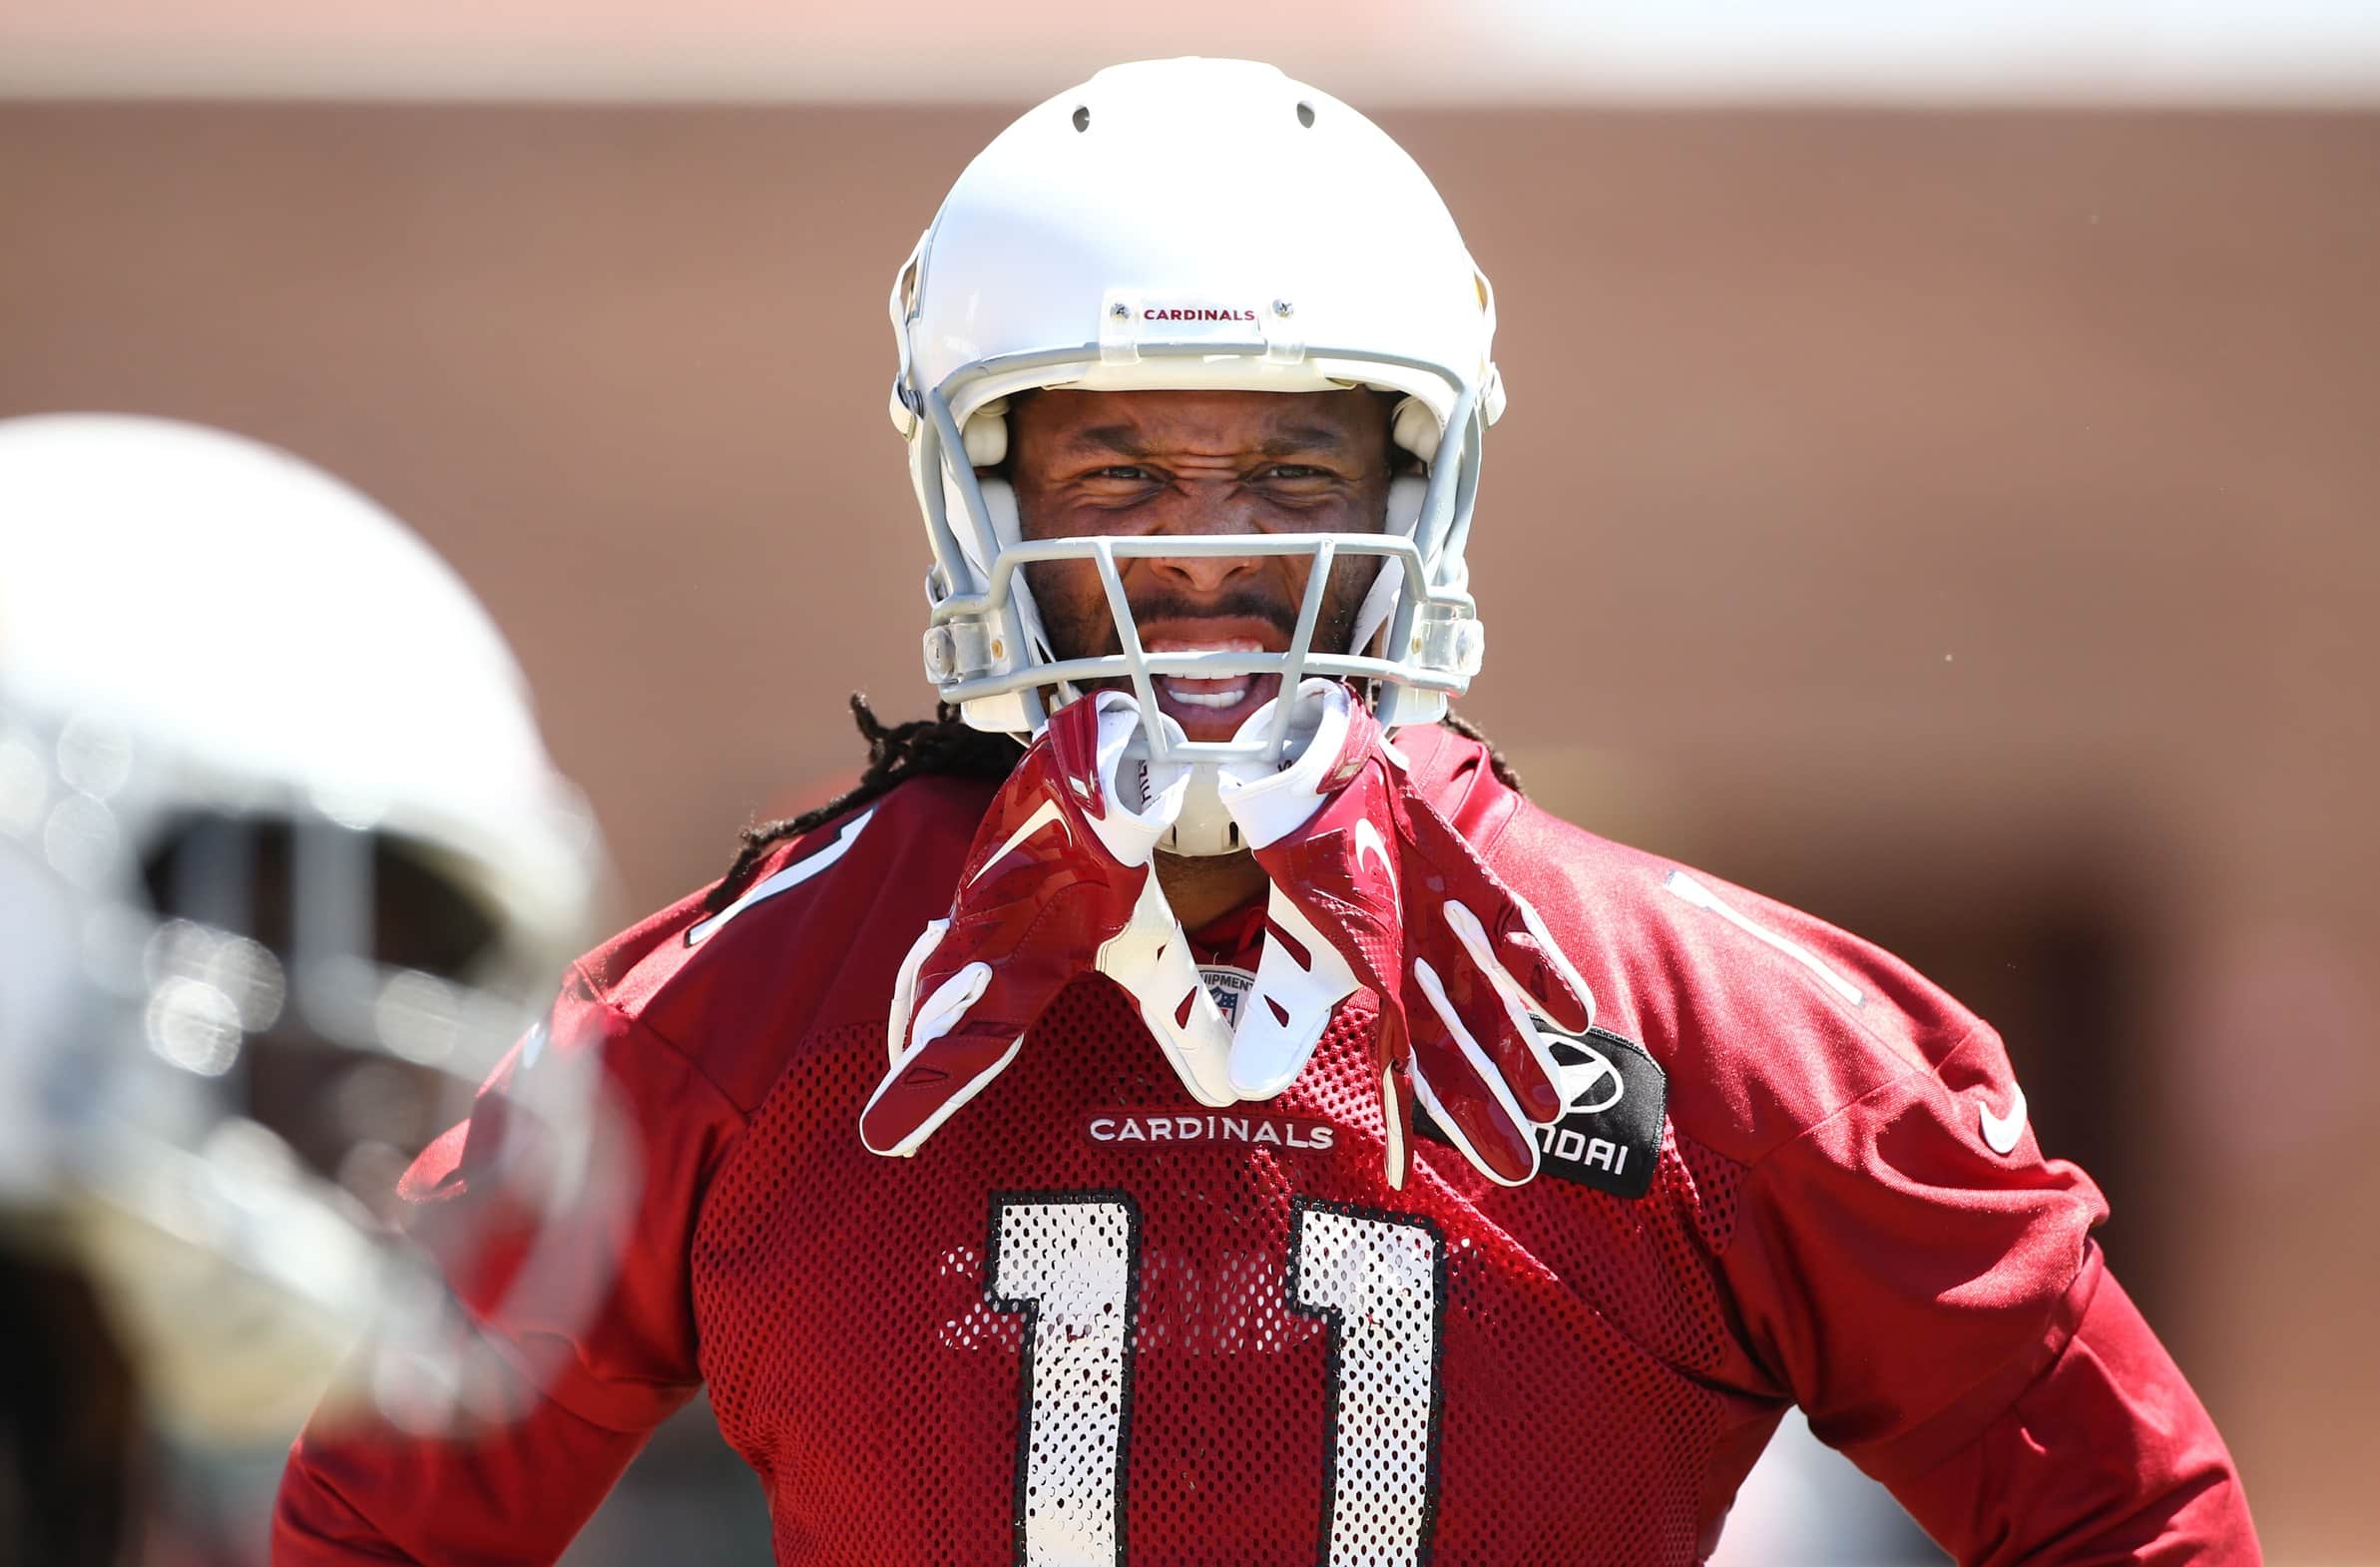 Larry Fitzgerald has no plans to retire, no intention of playing